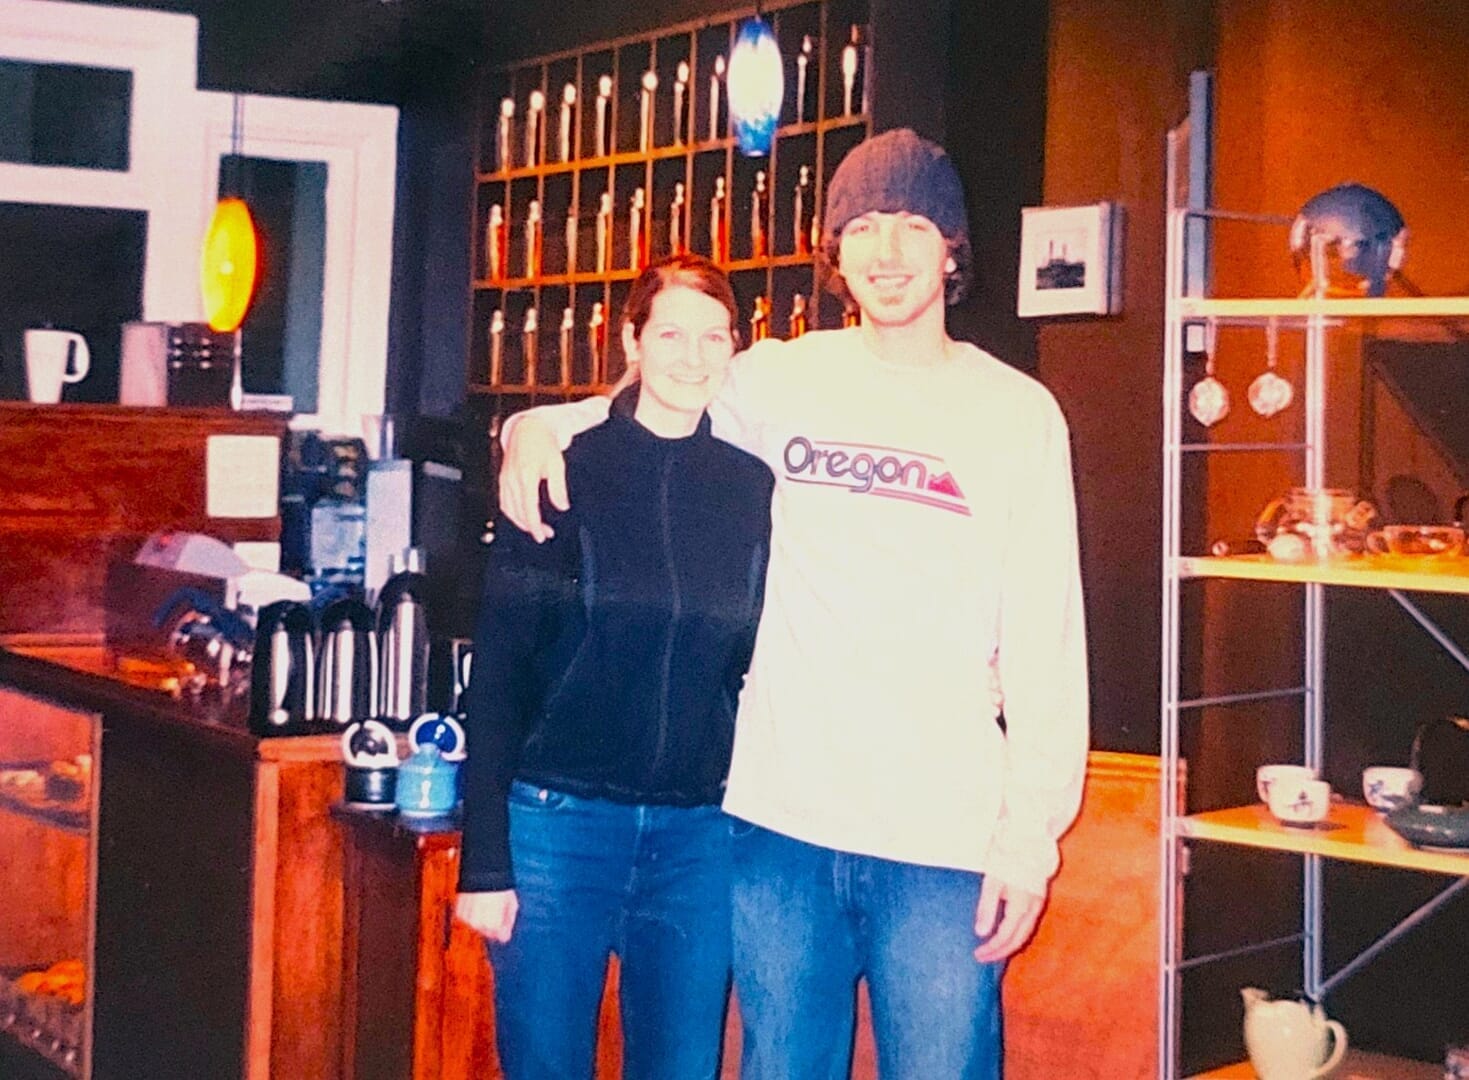 Portal Tea Owners Angela and Dominic Valdes NW shop 2003.jpg